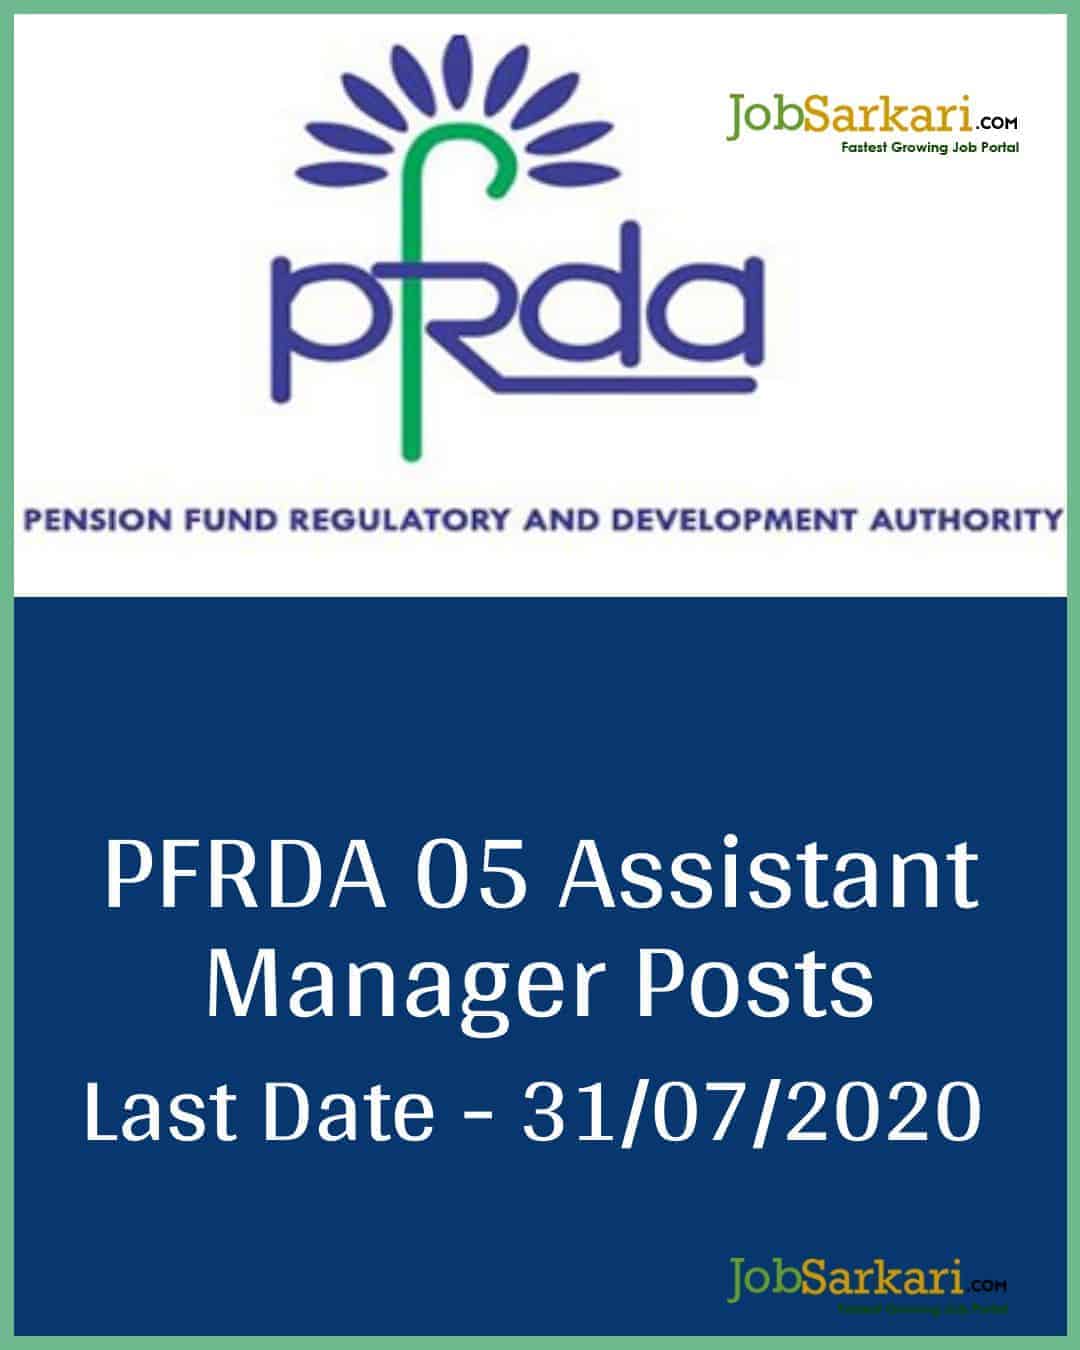 PFRDA 05 Assistant Manager Posts 1